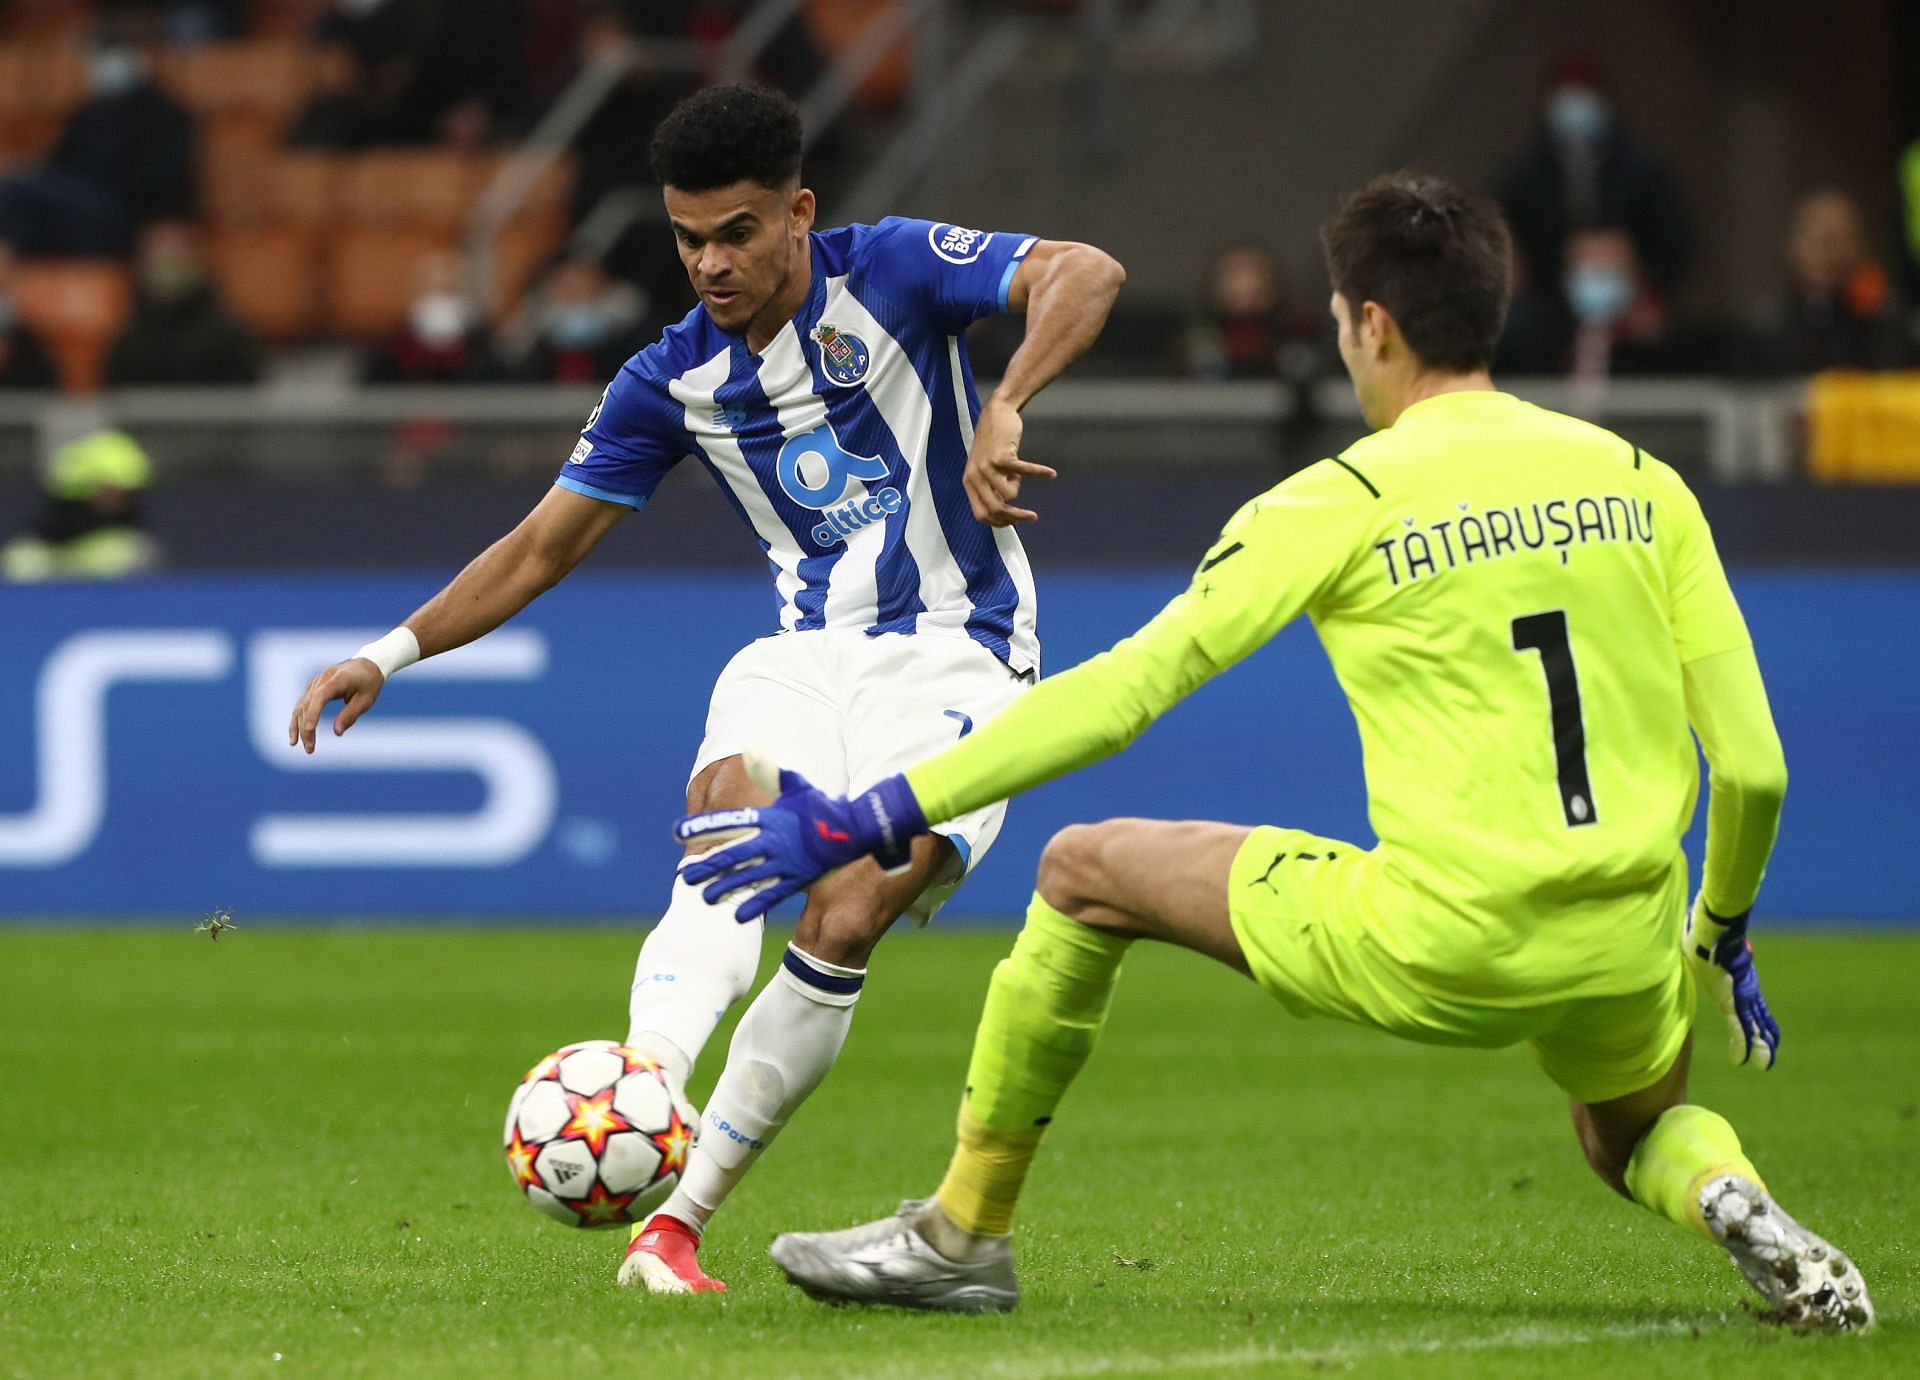 Luis Diaz nets one in the Champions League for Porto.